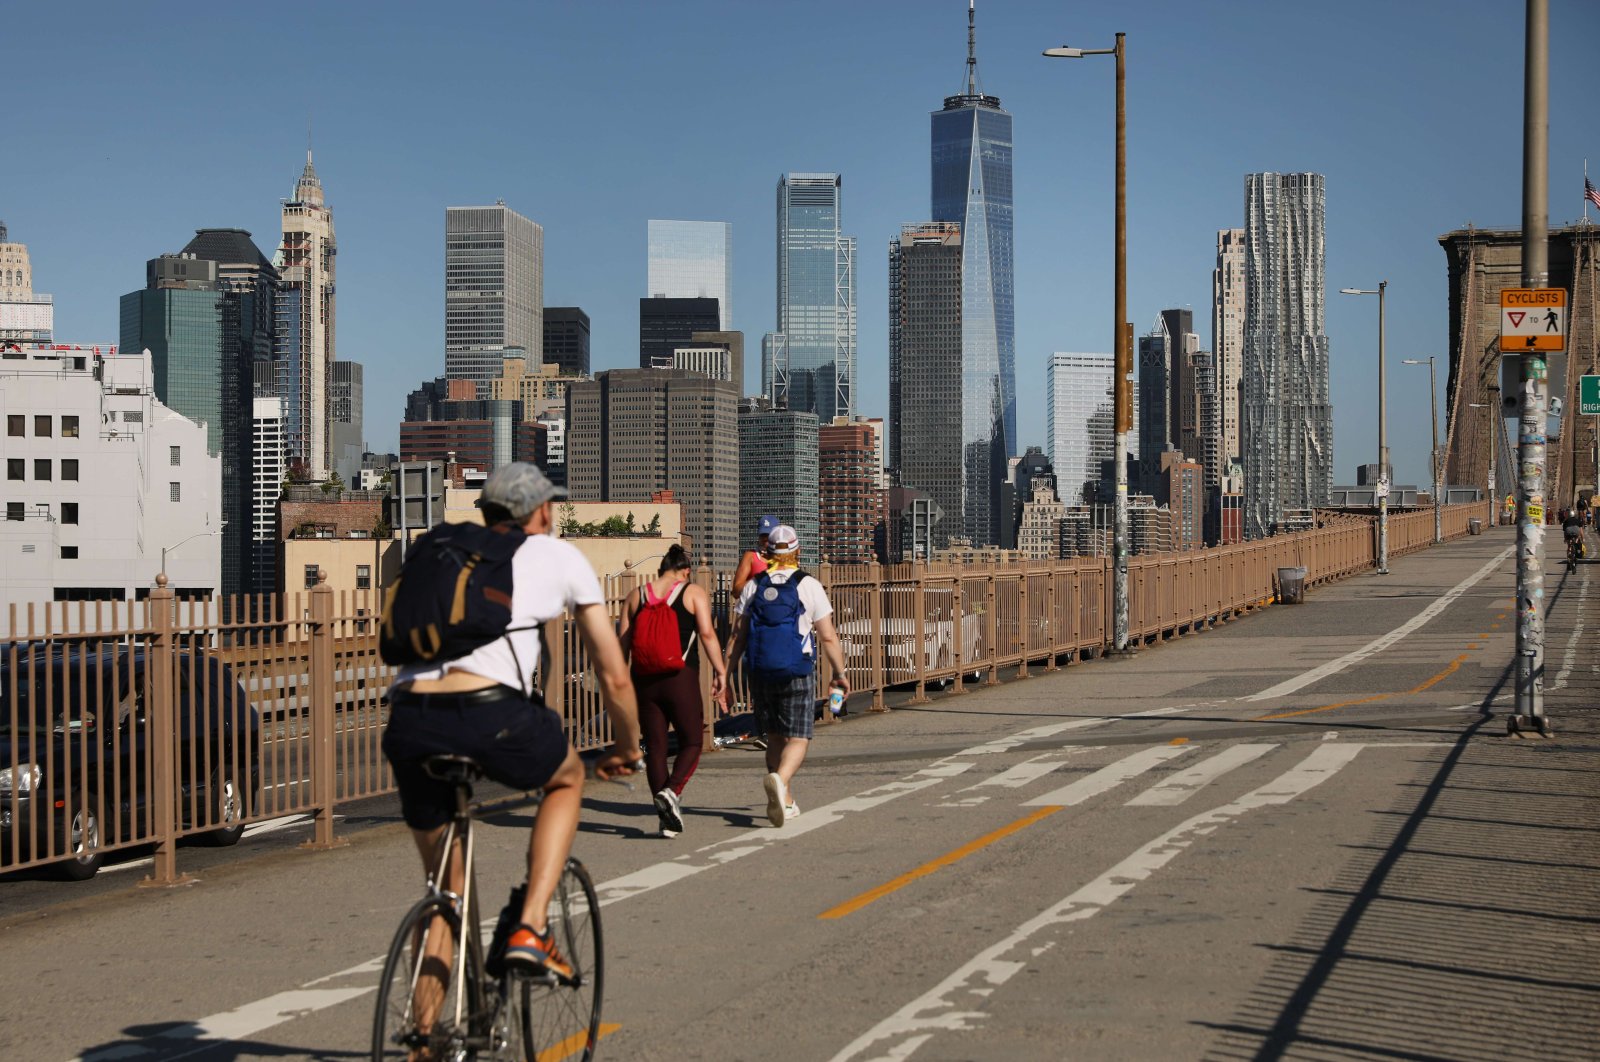 People are seen at the Brooklyn Bridge as Manhattan enters Phase 2 of reopening following restrictions imposed to curb the coronavirus pandemic, in New York, June 22, 2020. (Getty Images via AFP)